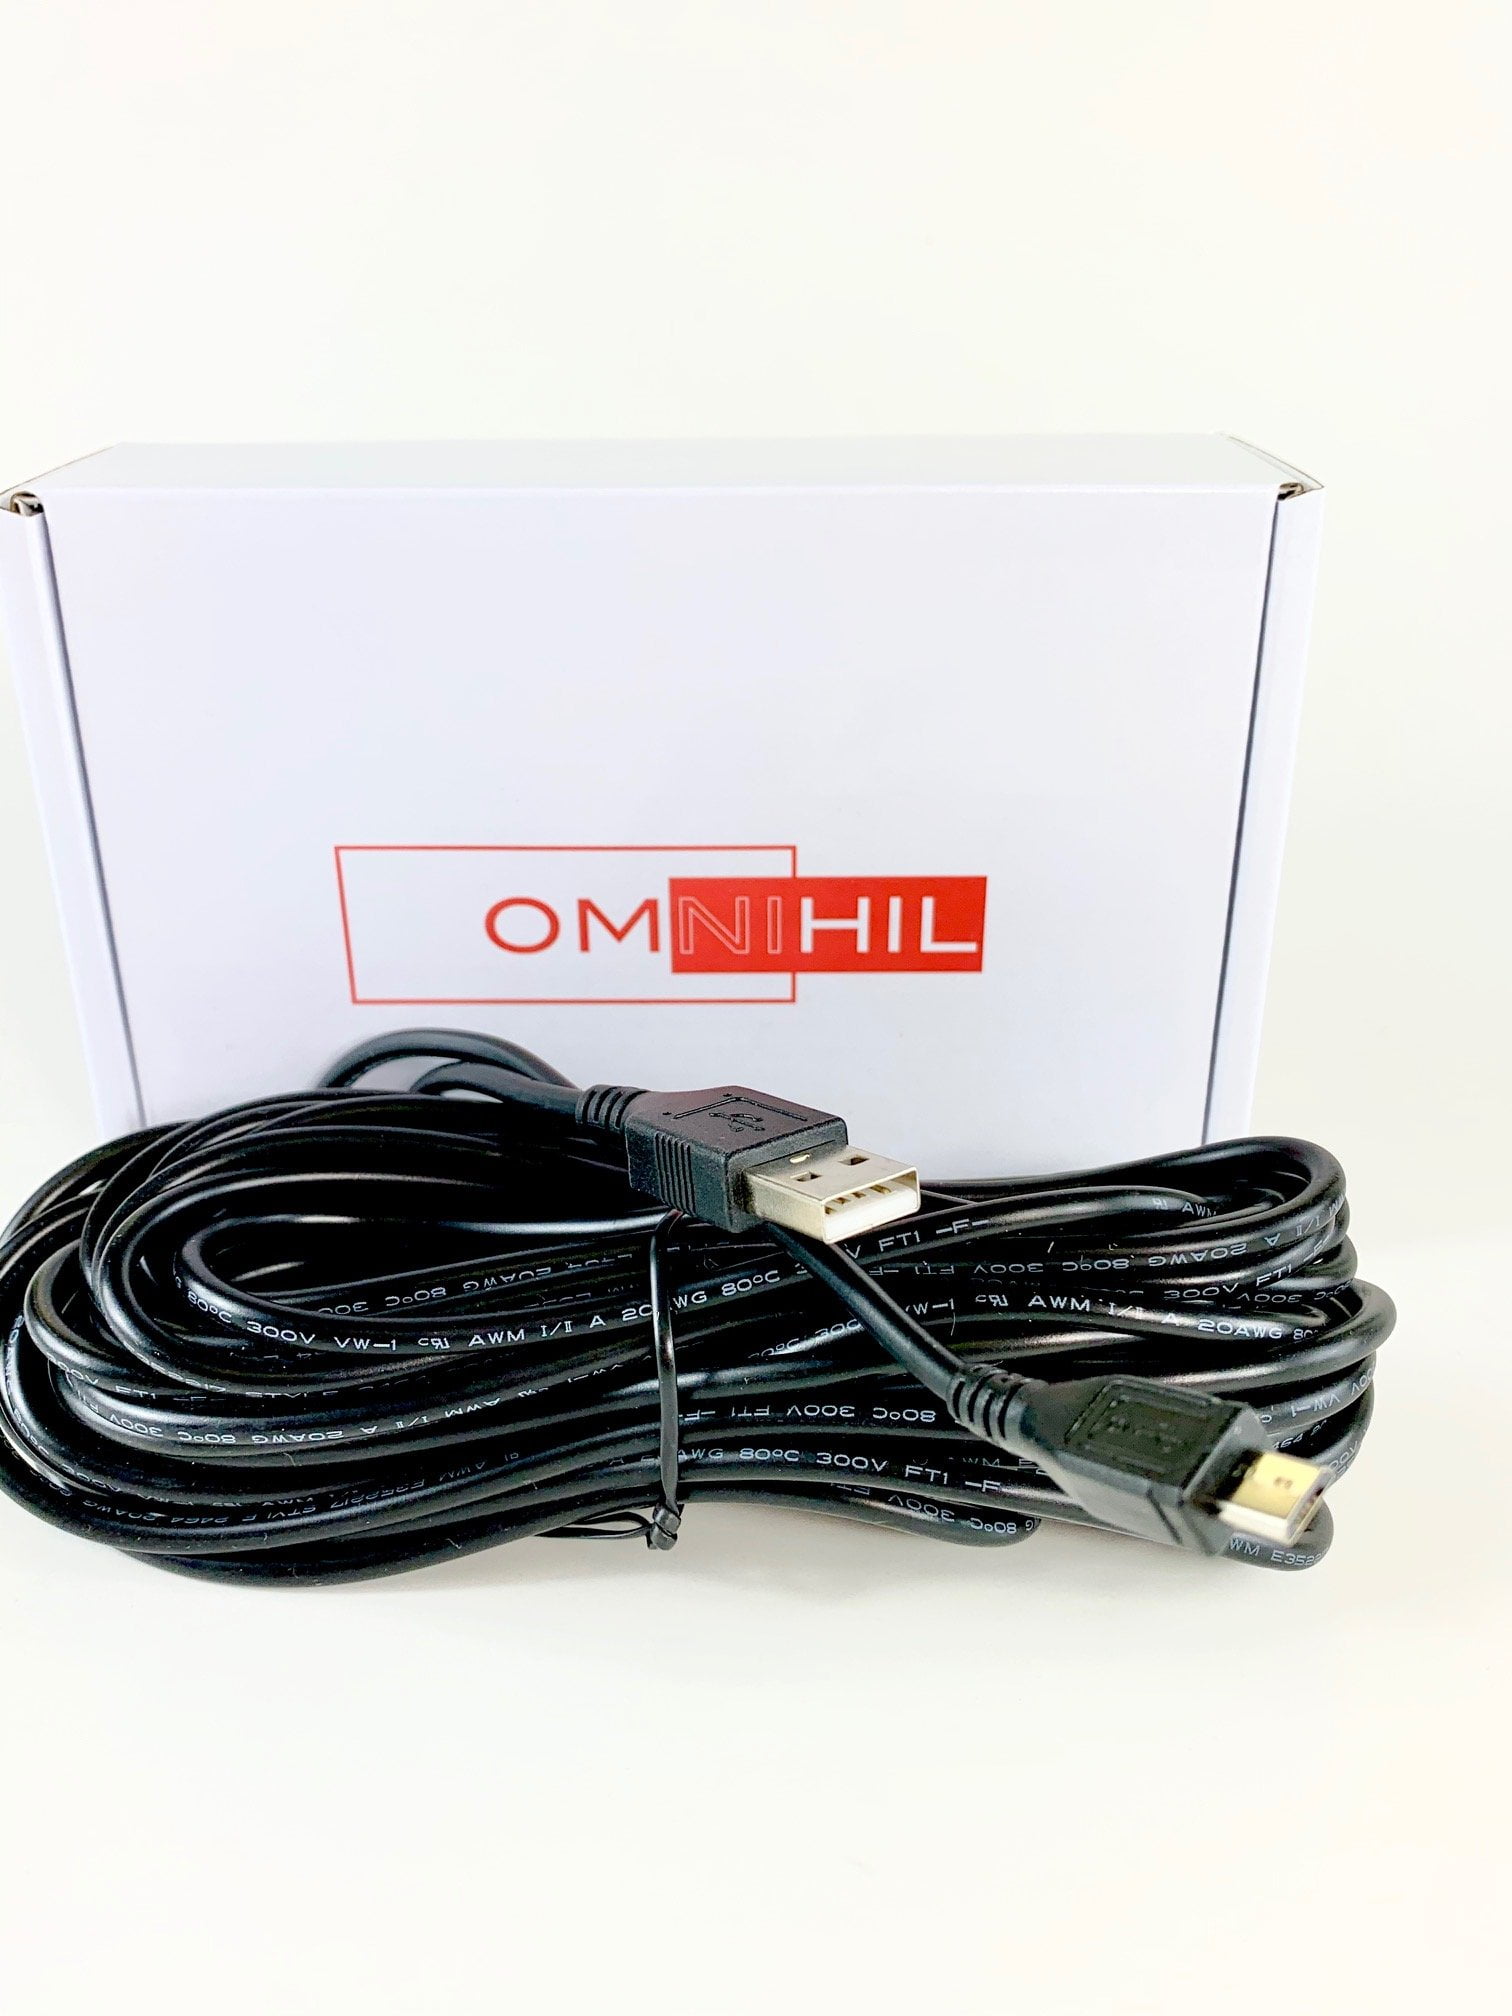 OMNIHIL 15 Feet Long High Speed USB 2.0 Cable Compatible with DOSS SoundBox Plus